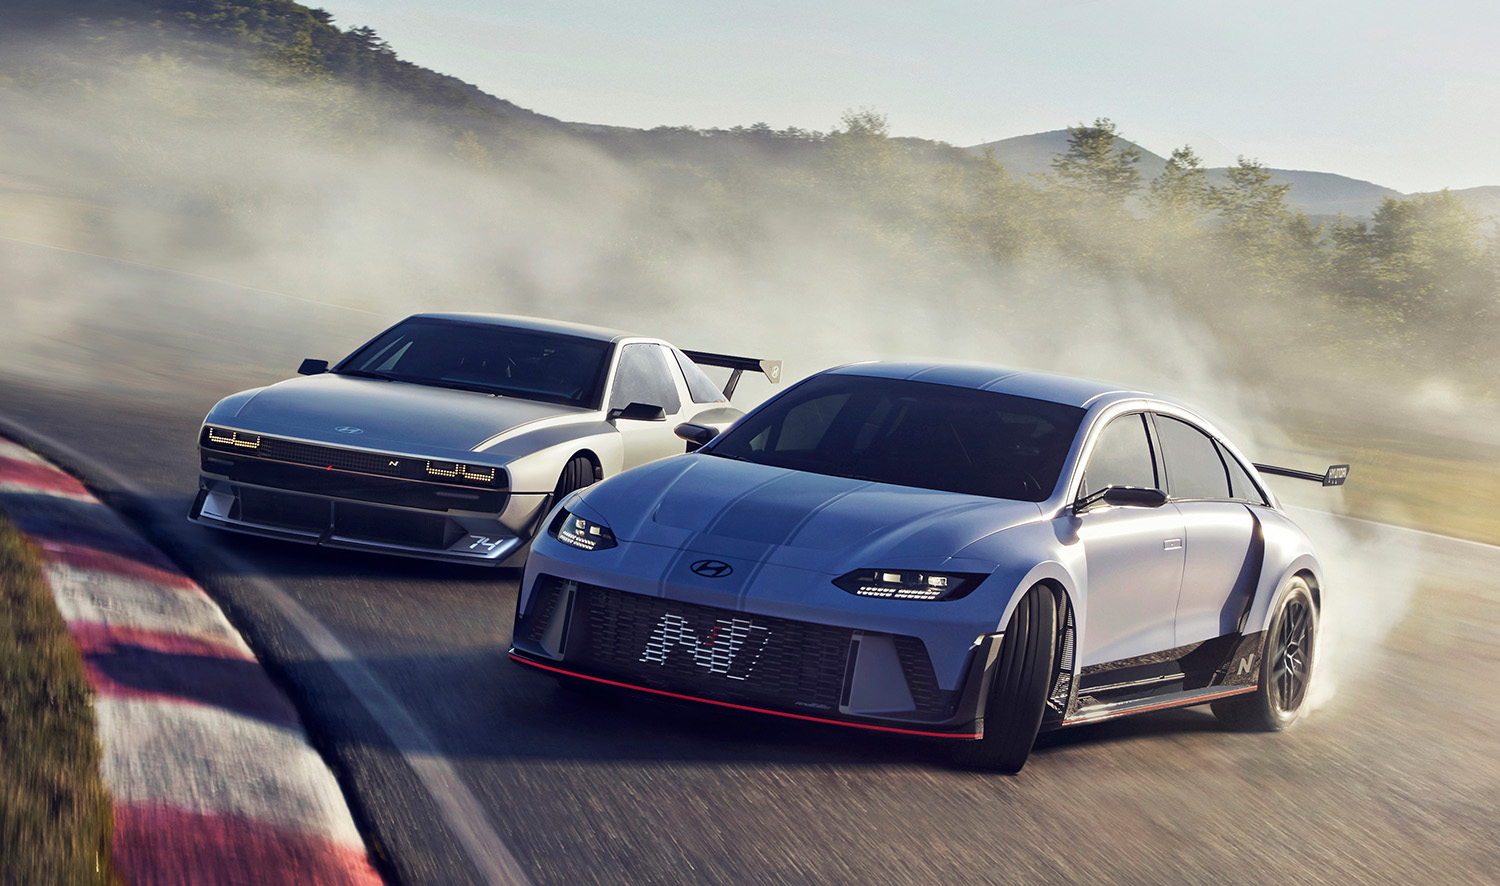 Hyundai RN22e and N Vision 74 electric sports car concepts drifting together on race track